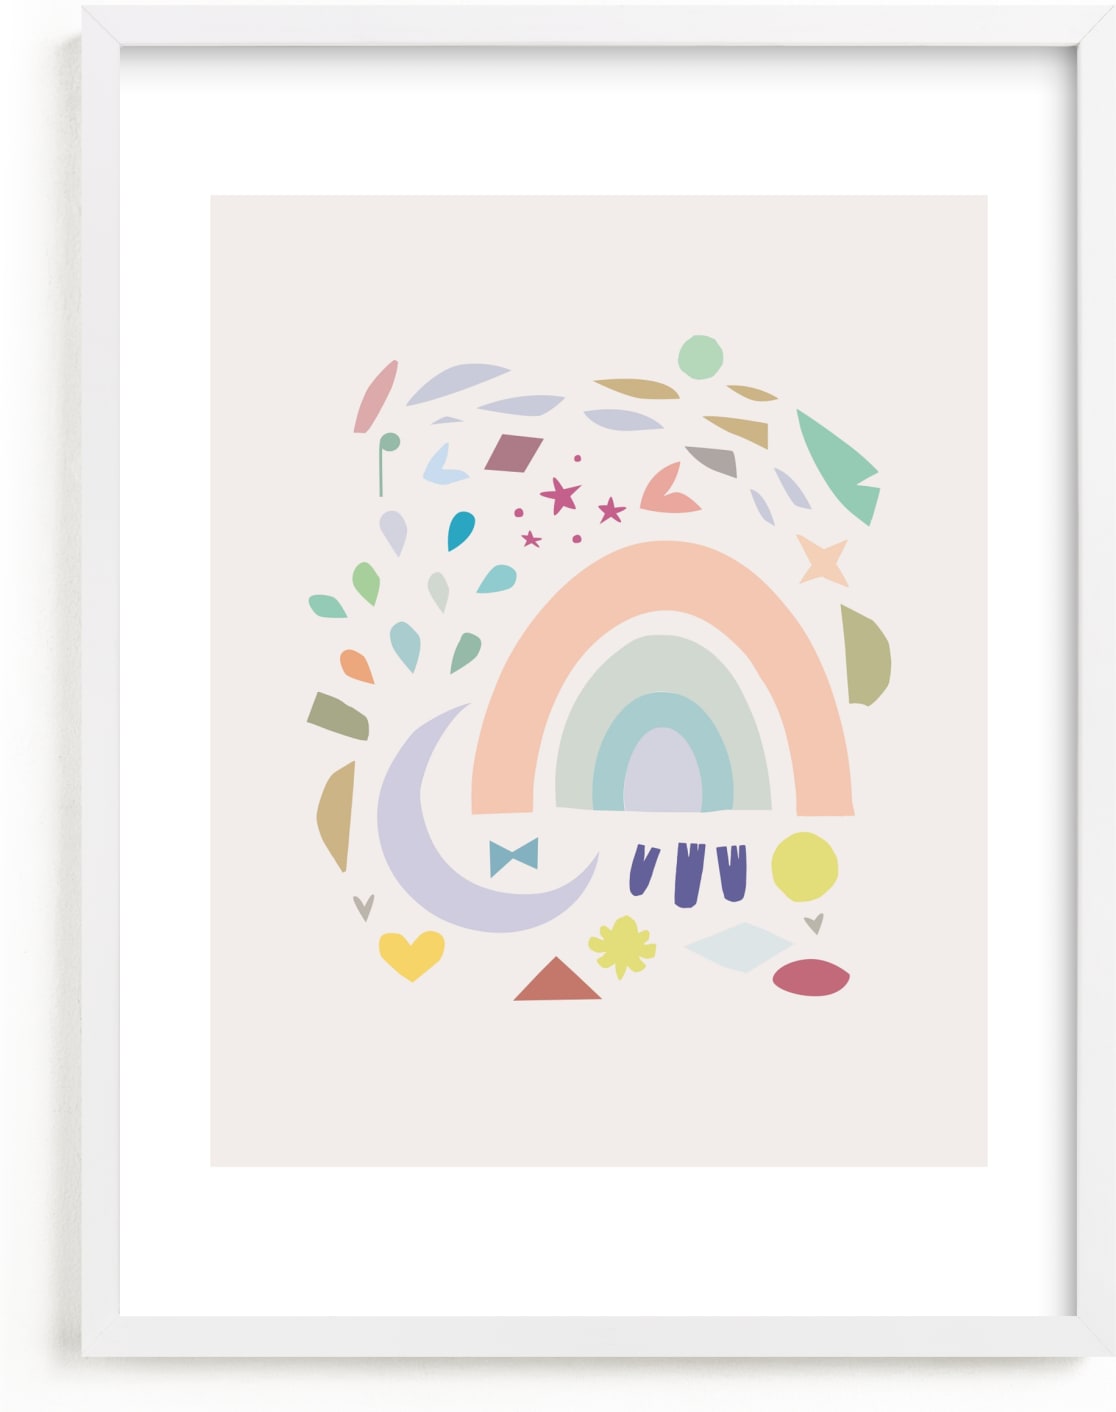 This is a colorful nursery wall art by Lori Wemple called Shapes.